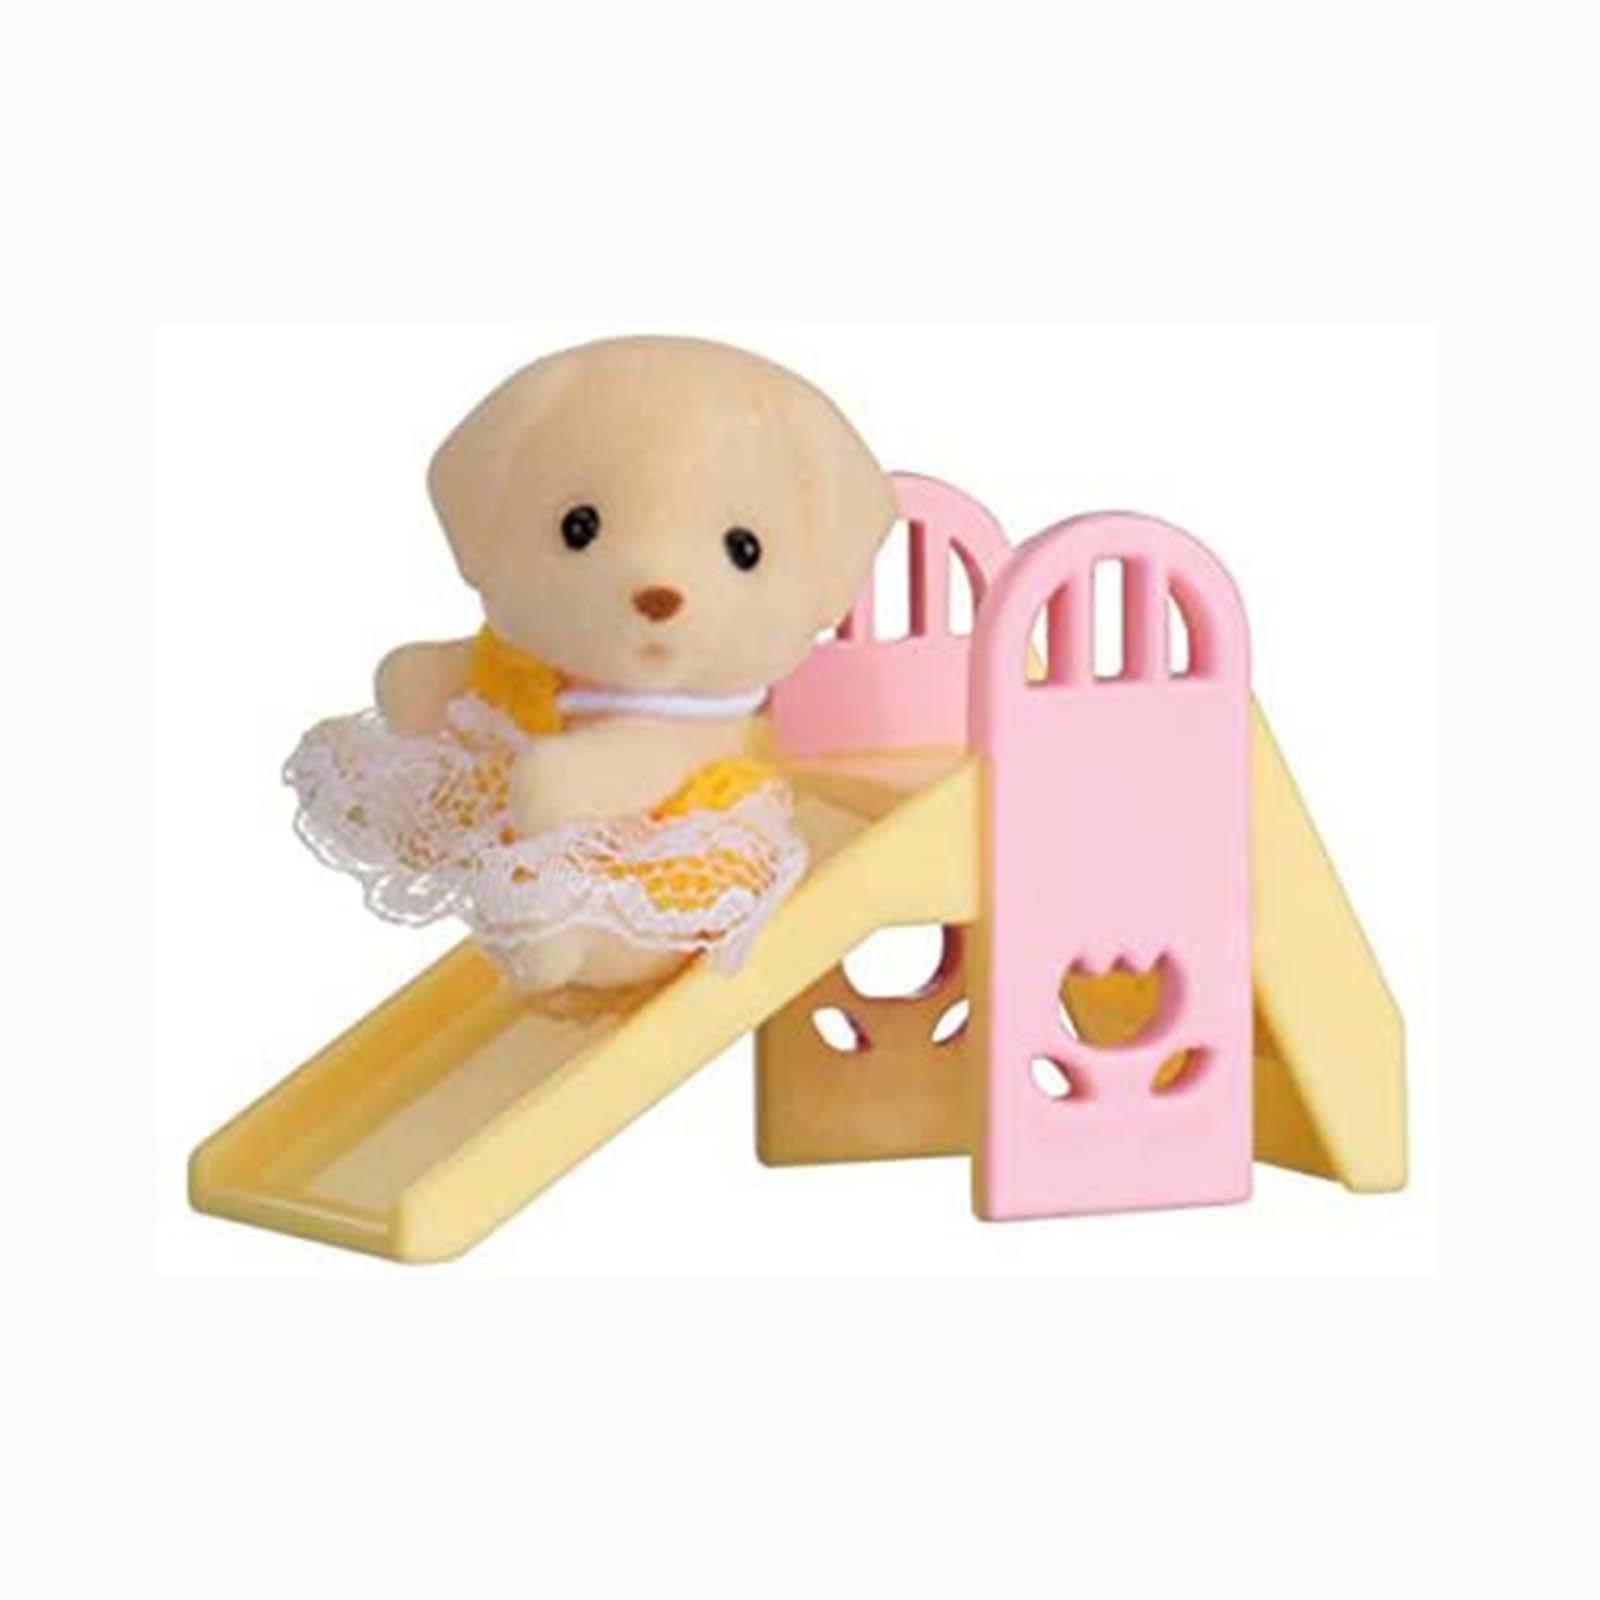 Calico Critters Mini Carry Case Dog on Slide